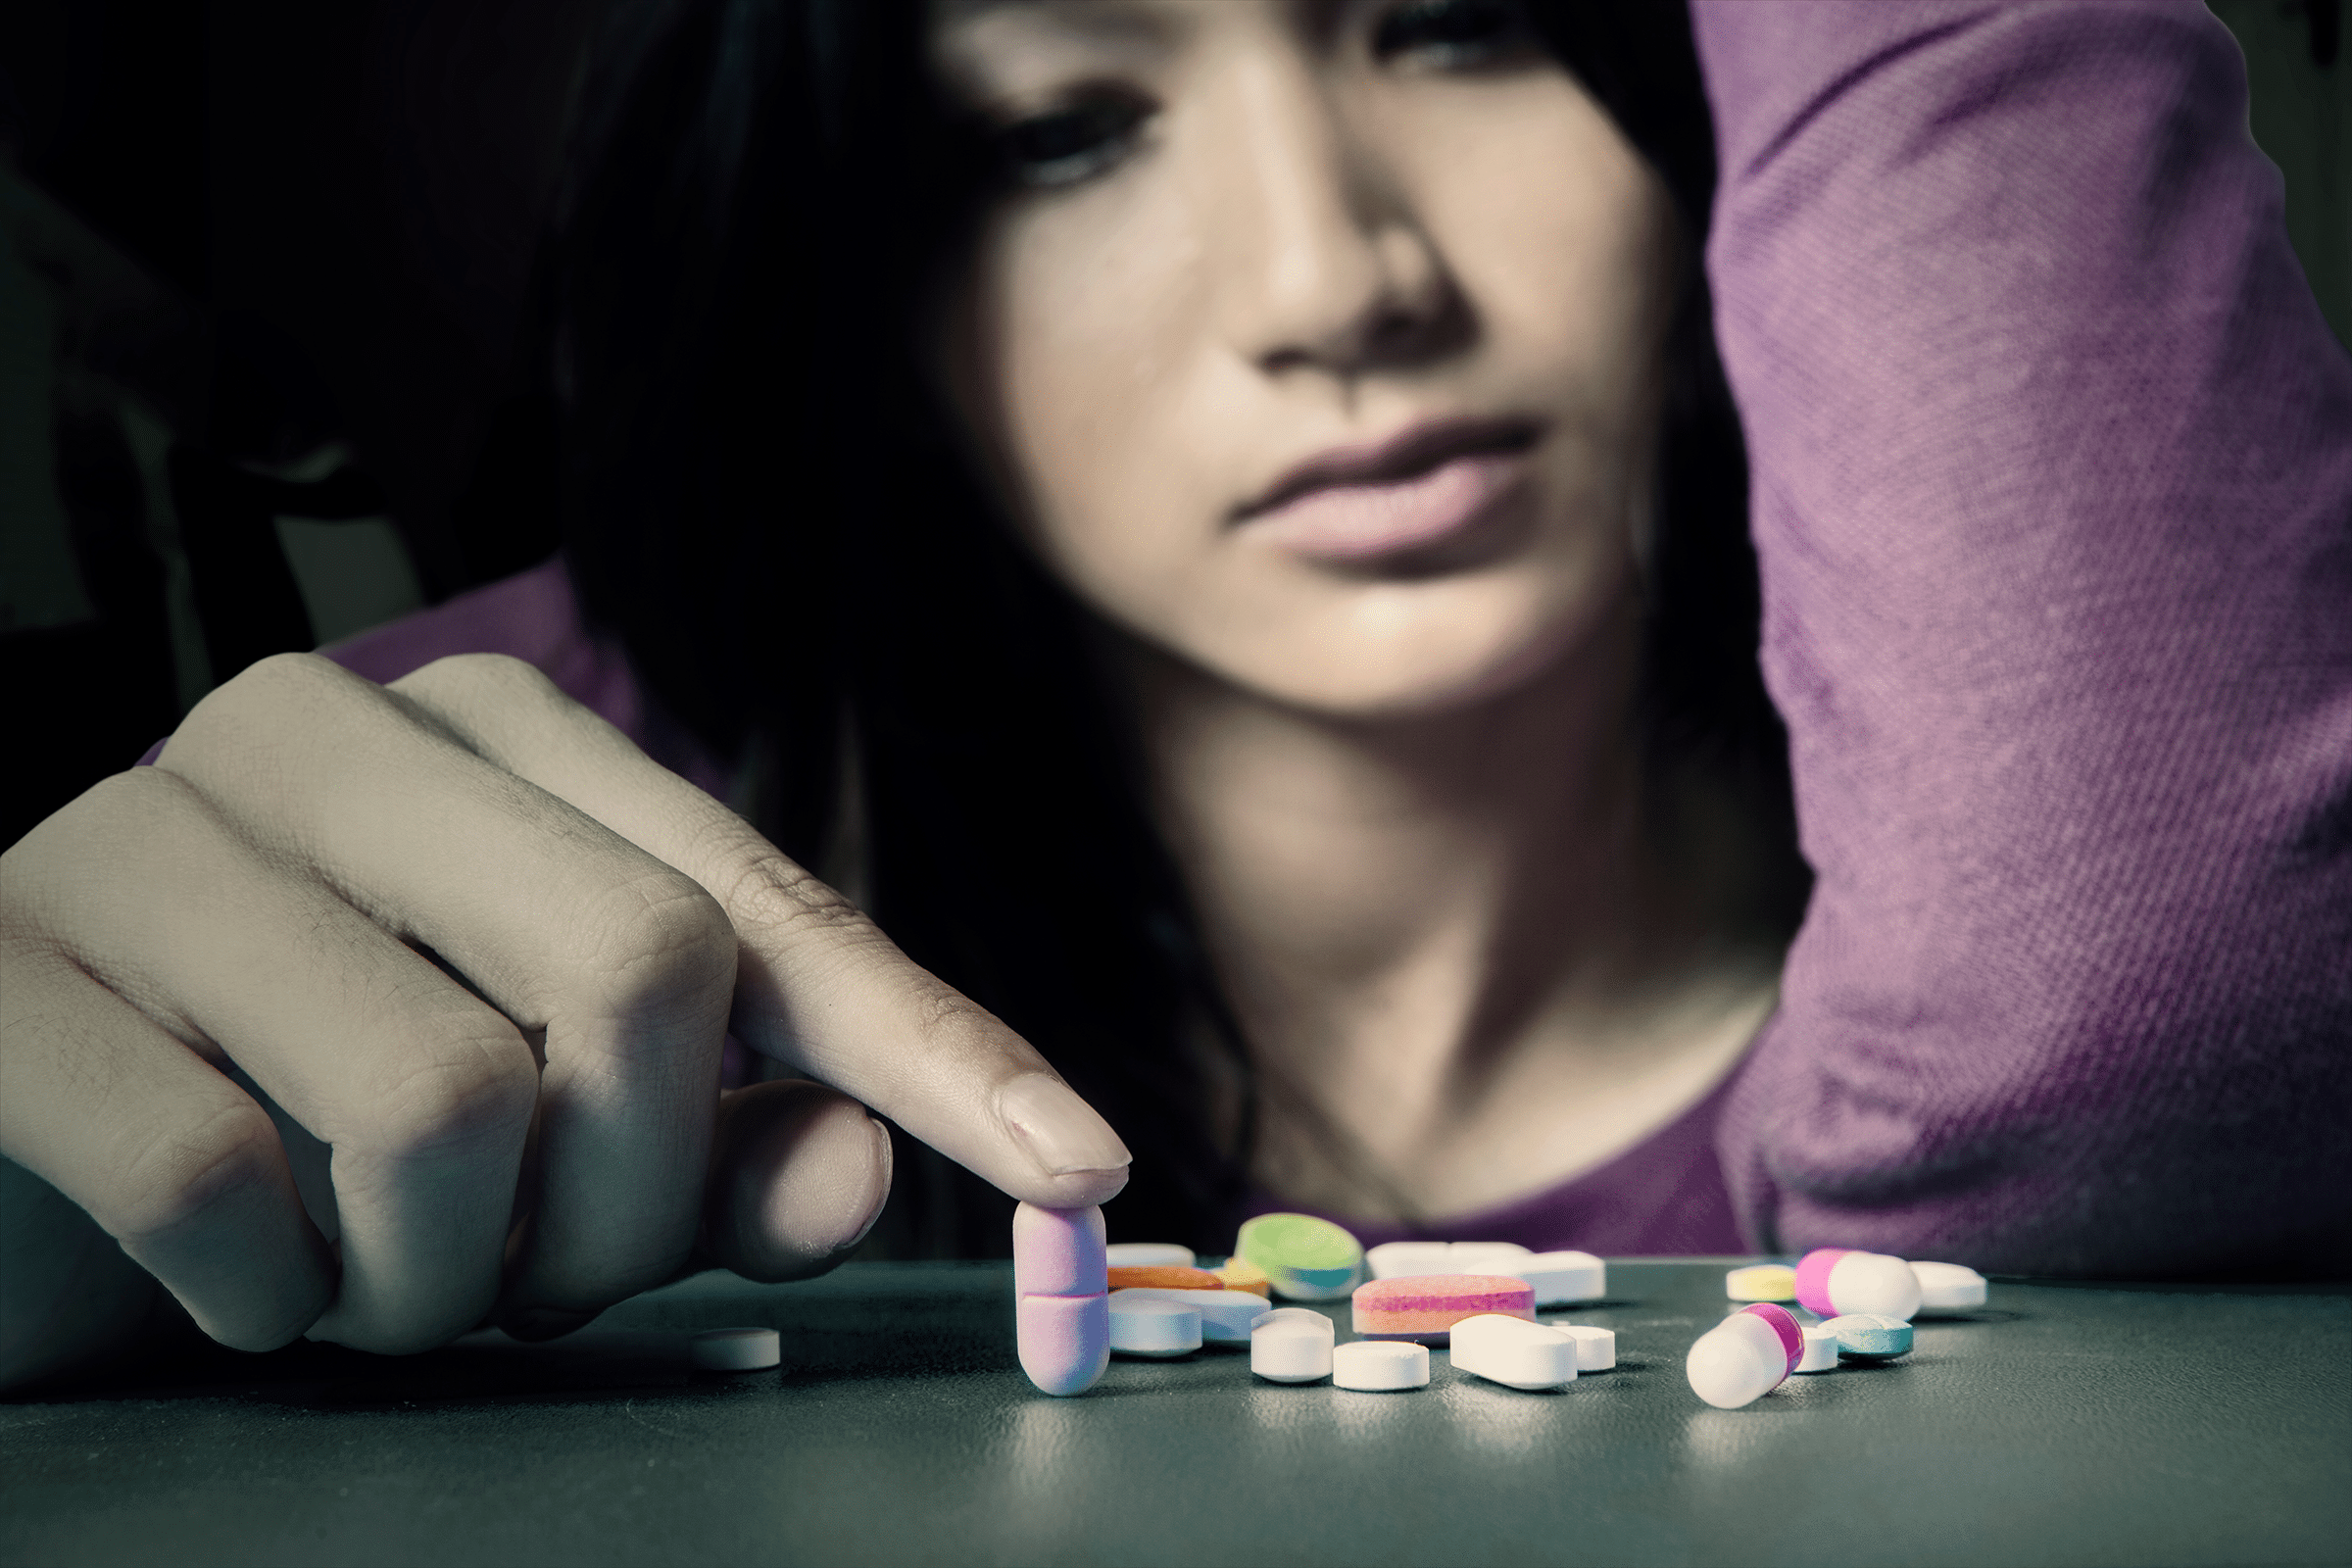 effects of drug addiction on teenagers